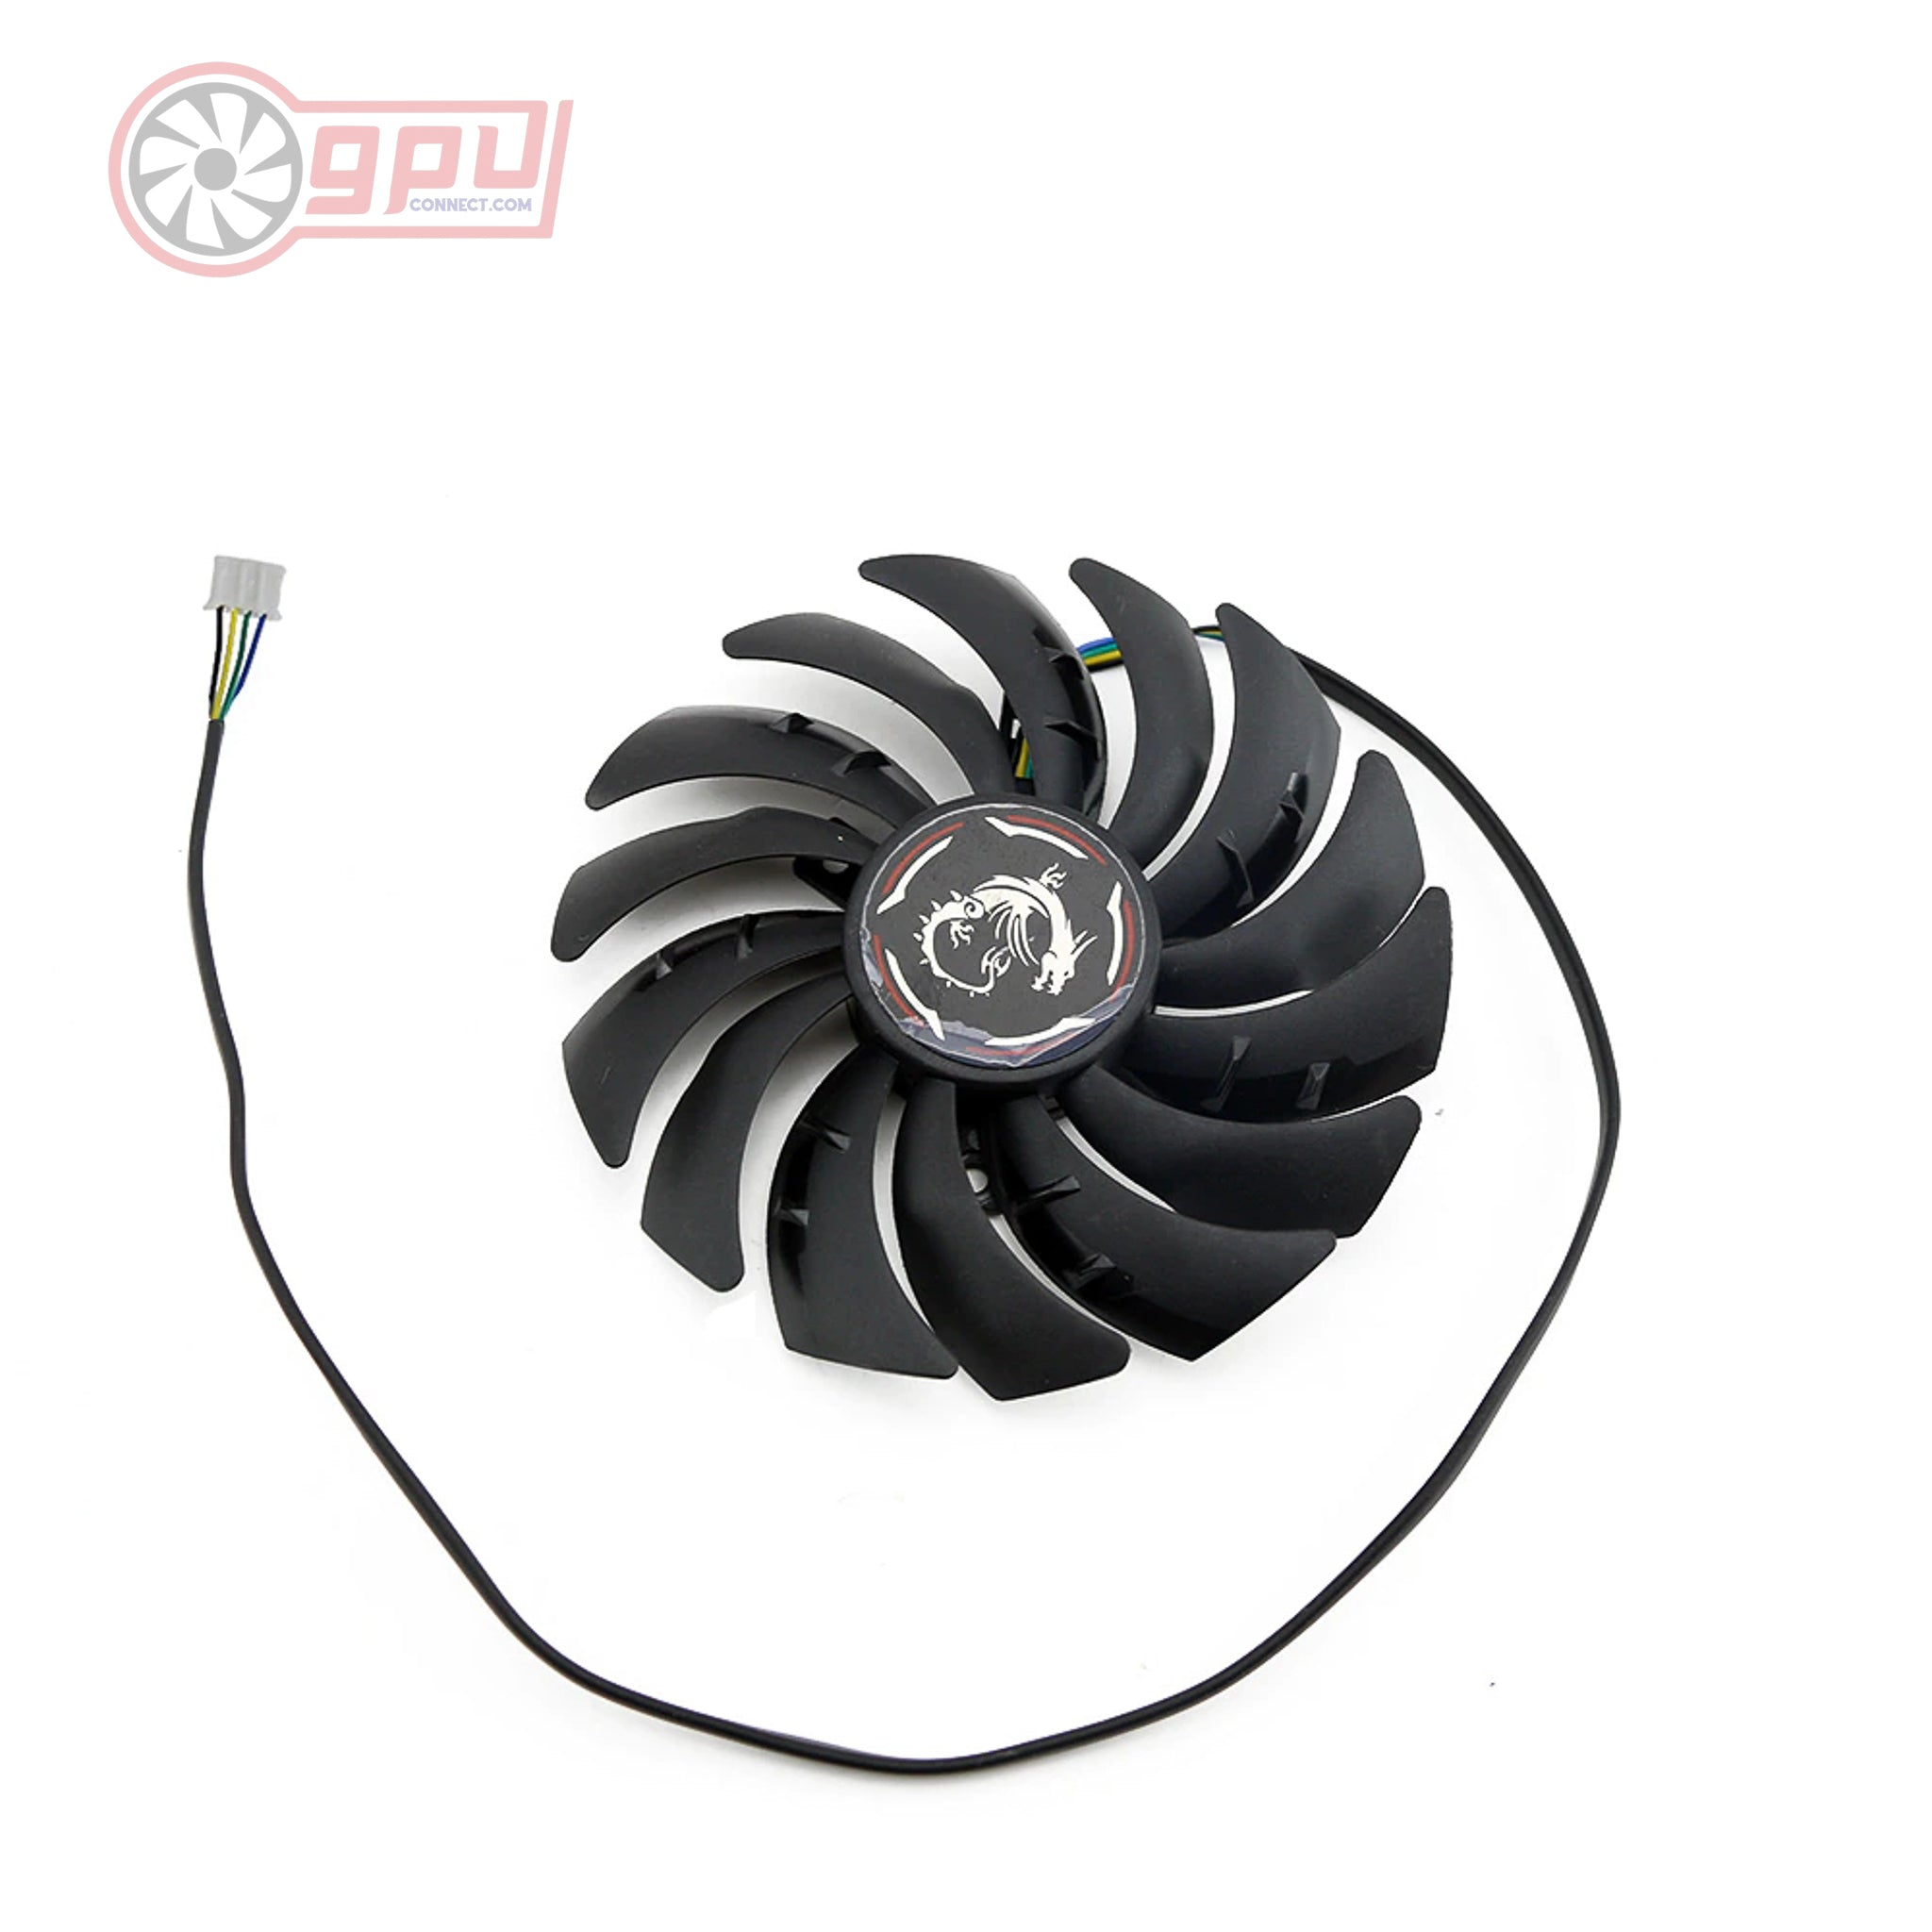 MSI RTX 2070 GAMING Z Replacement Graphics Card Card Cooling Fan – 